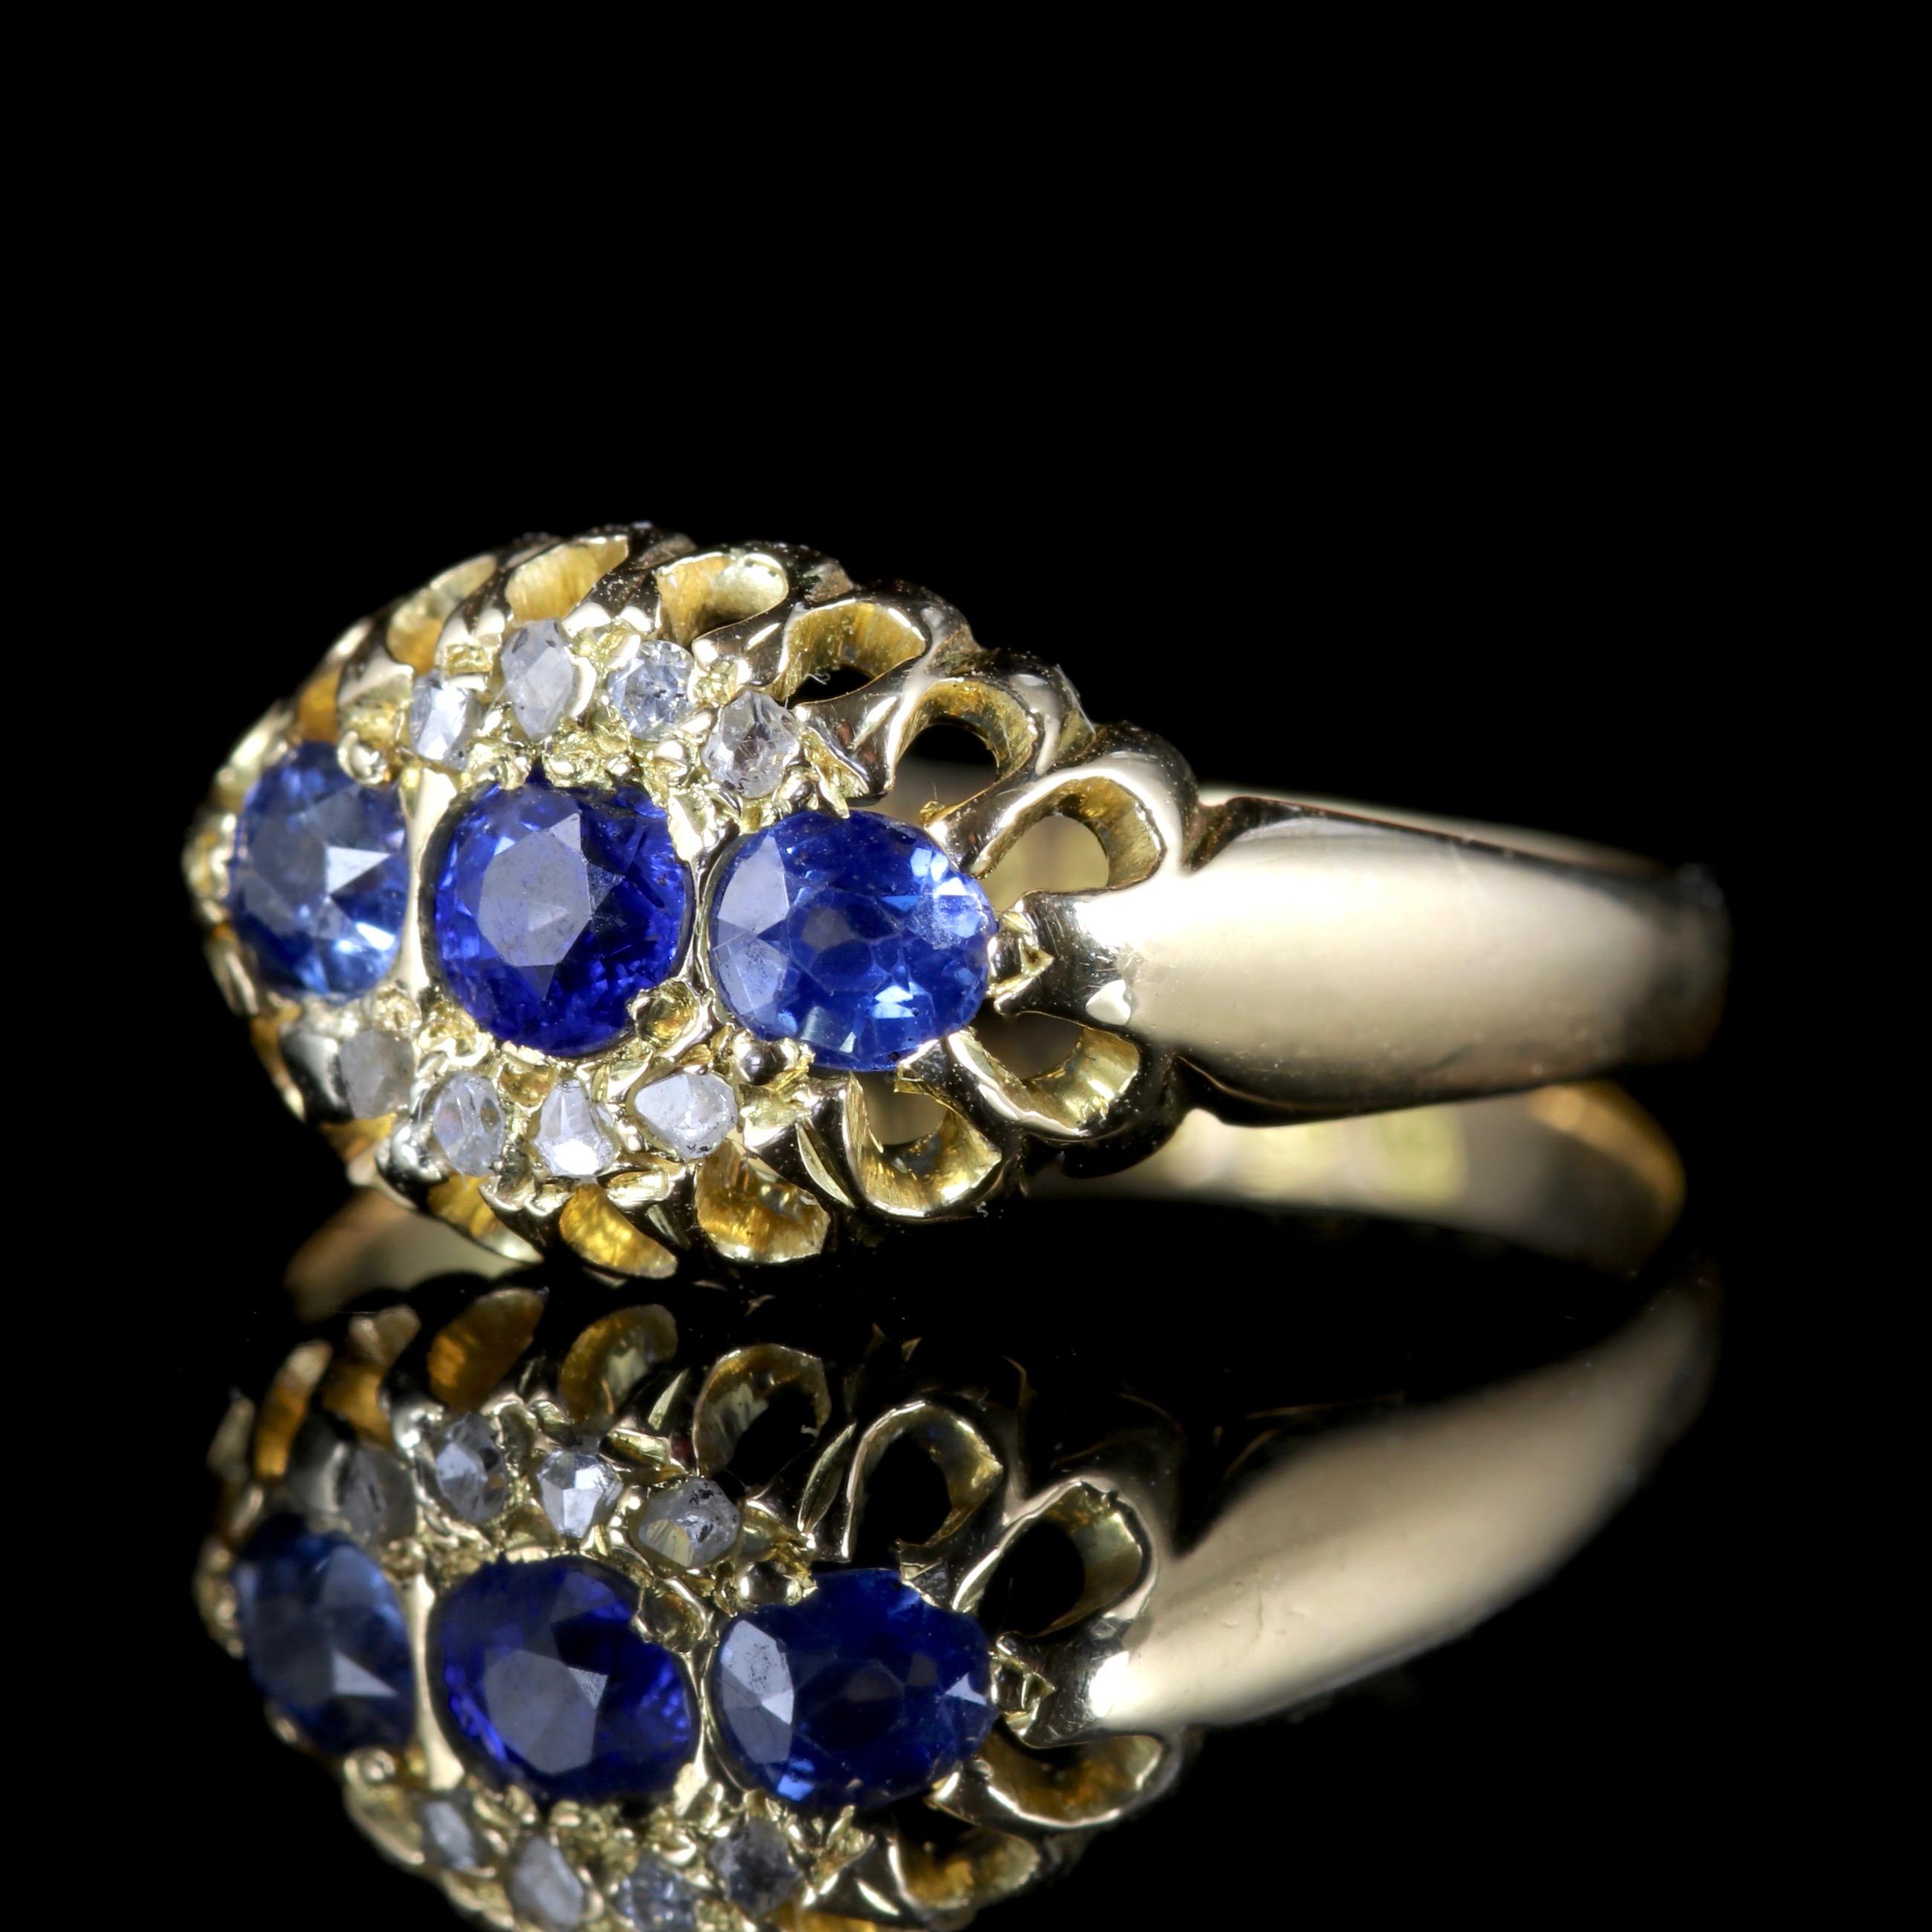 This beautiful Edwardian 18ct Yellow Gold Sapphire and Diamond ring is fully hallmarked, Chester 1903.

A trilogy of Sapphires are set across the central gallery with a halo of Diamonds surrounding them. 

Trilogy means past, present and future or